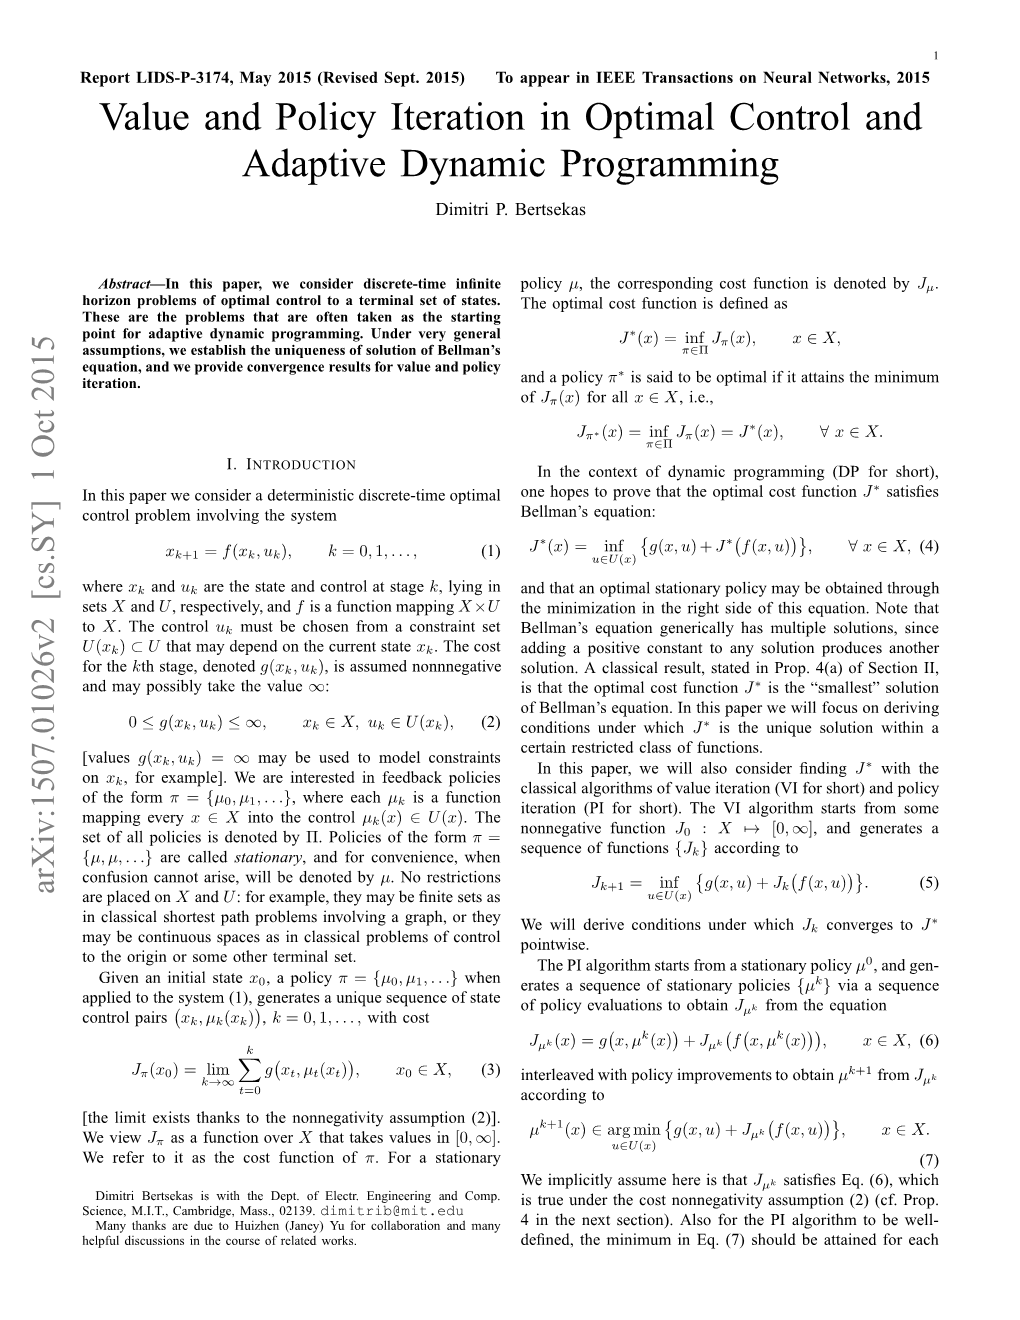 Value and Policy Iteration in Optimal Control and Adaptive Dynamic